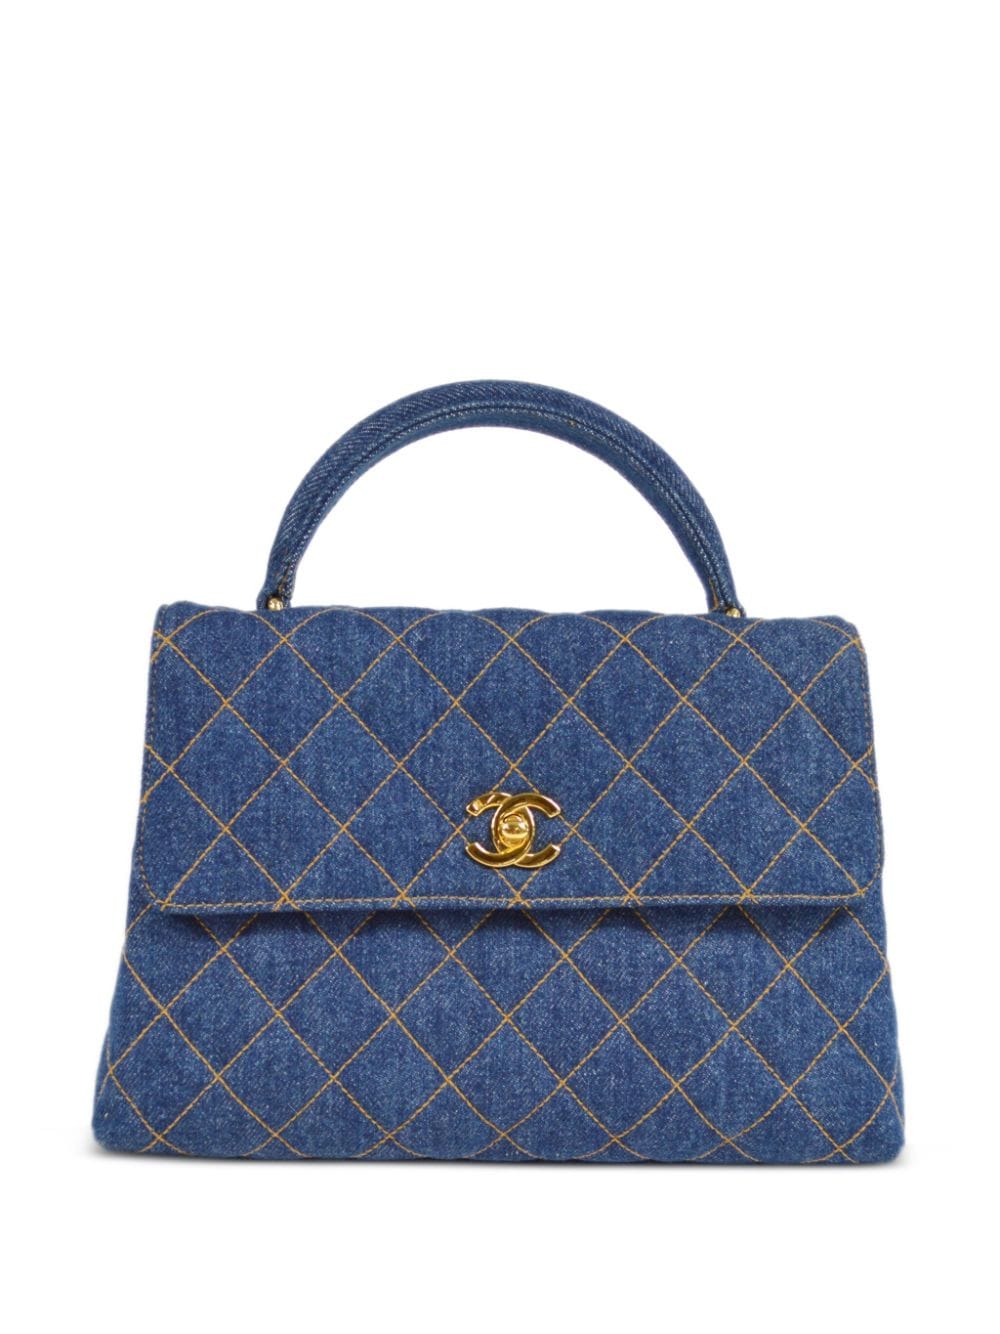 CHANEL Pre-Owned 1997 Kelly Handtasche - Blau von CHANEL Pre-Owned